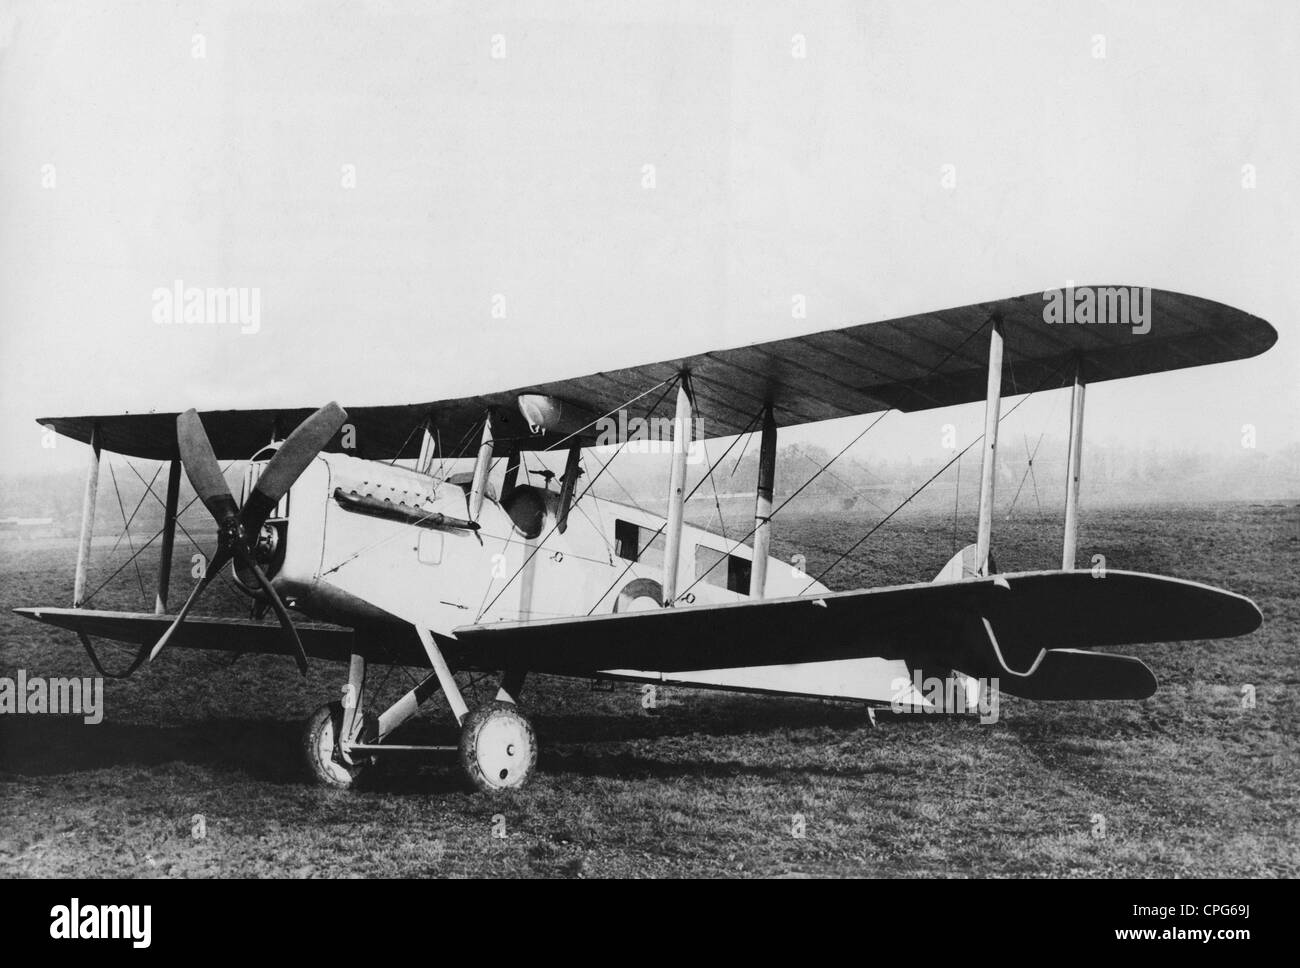 transport / transportation, aviation, bi-plane, Airco DH.4A, 1920s, 20s, 20th century, historic, historical, propeller plane, propeller-driven aircraft, aeroplane, airplane, plane, airplanes, aeroplanes, planes, aircraft, aircraft, airfield, standing, passenger planes, passenger plane, airliner, Additional-Rights-Clearences-Not Available Stock Photo